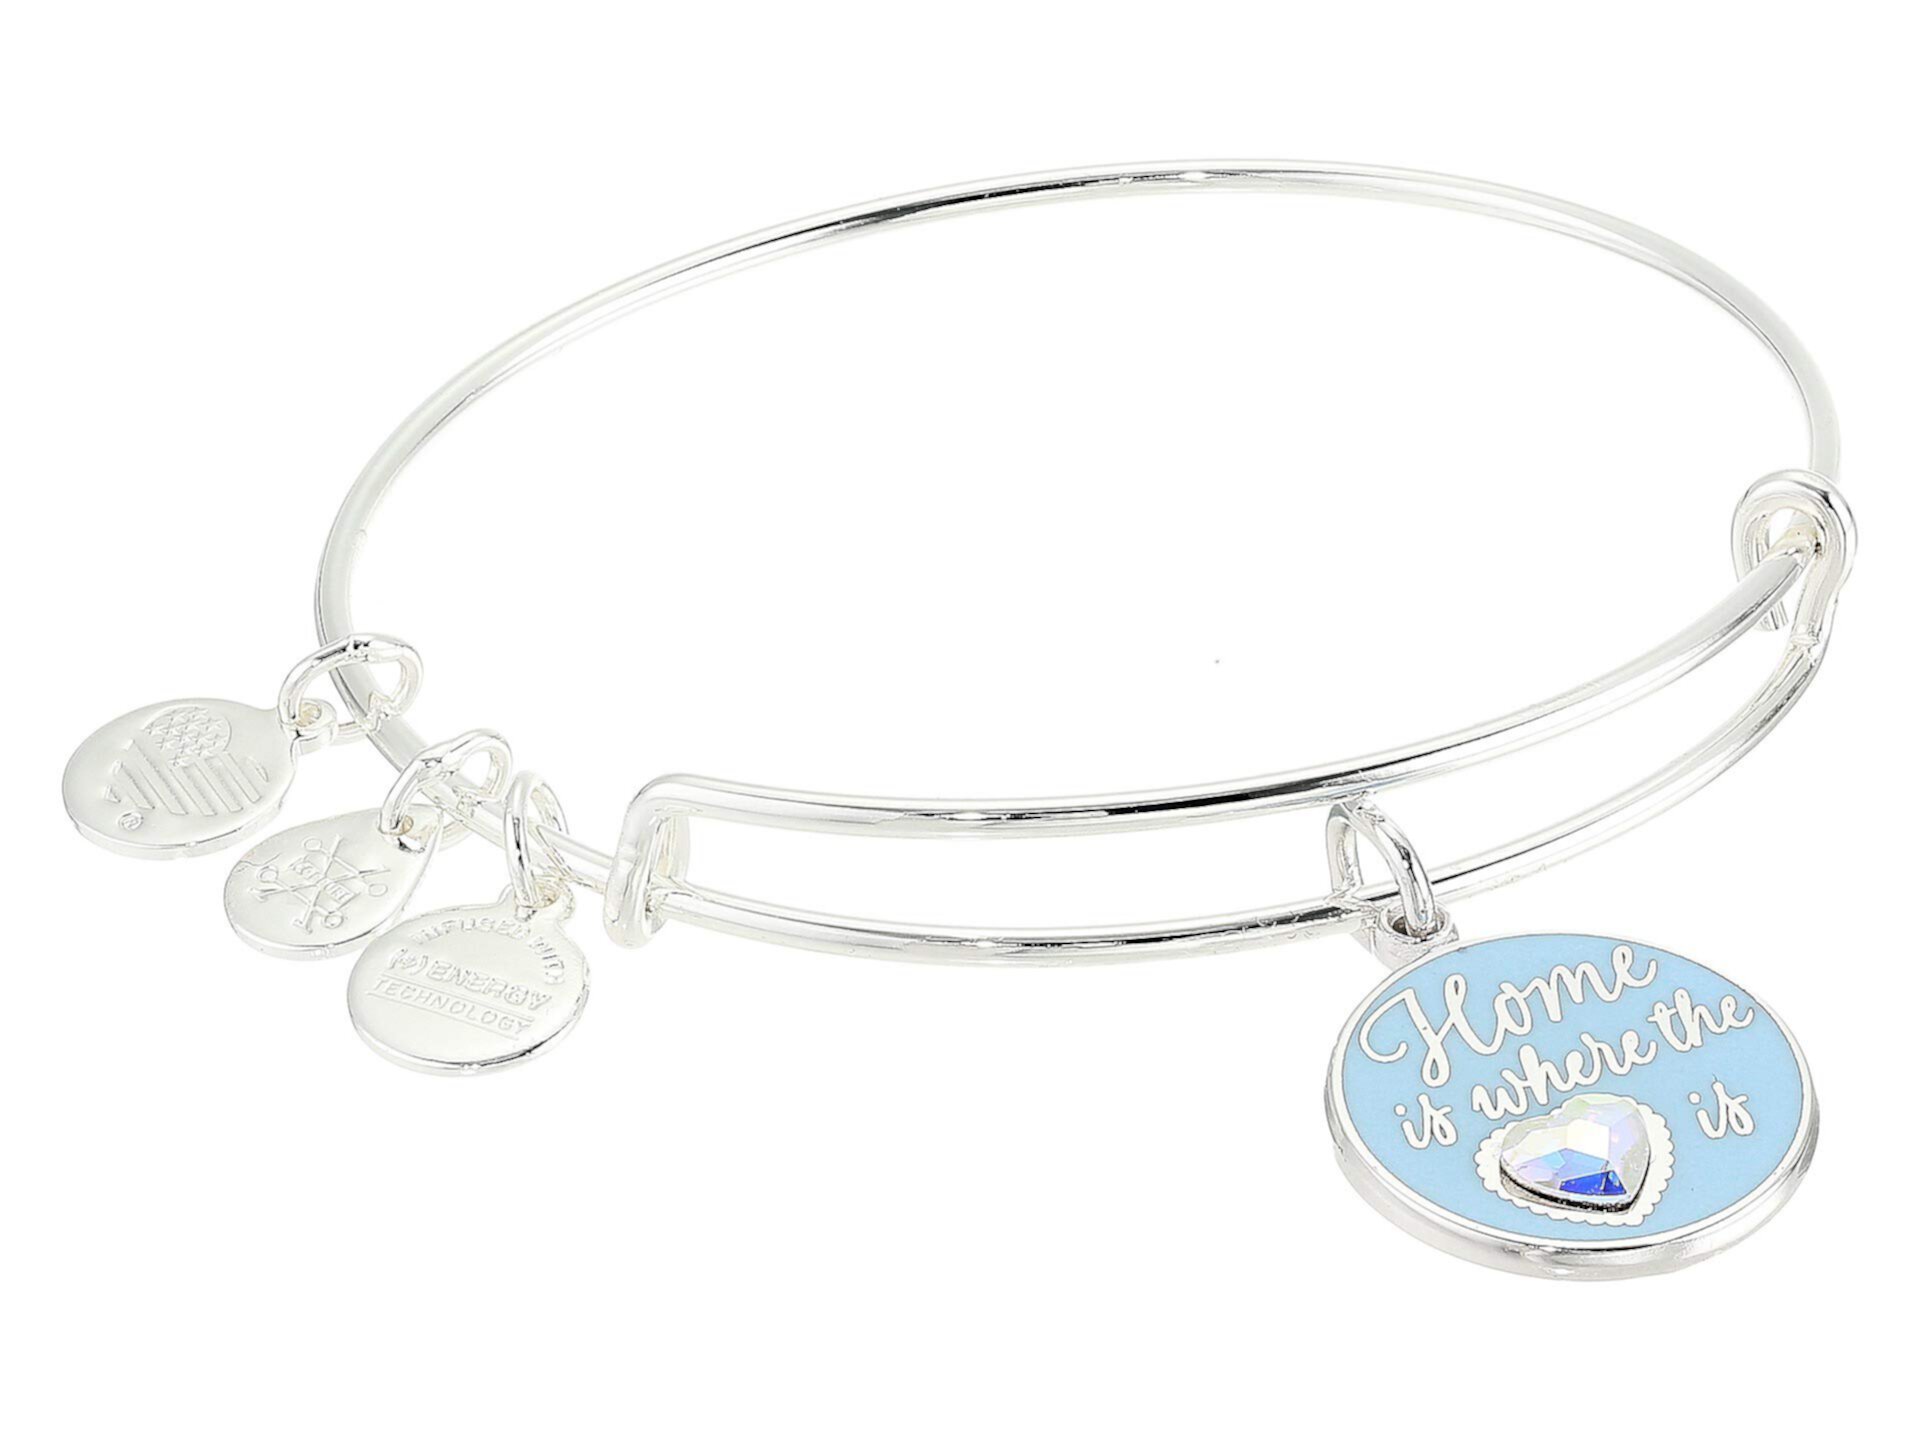 Home Is Where The Heart Is Bangle Bracelet Alex and Ani